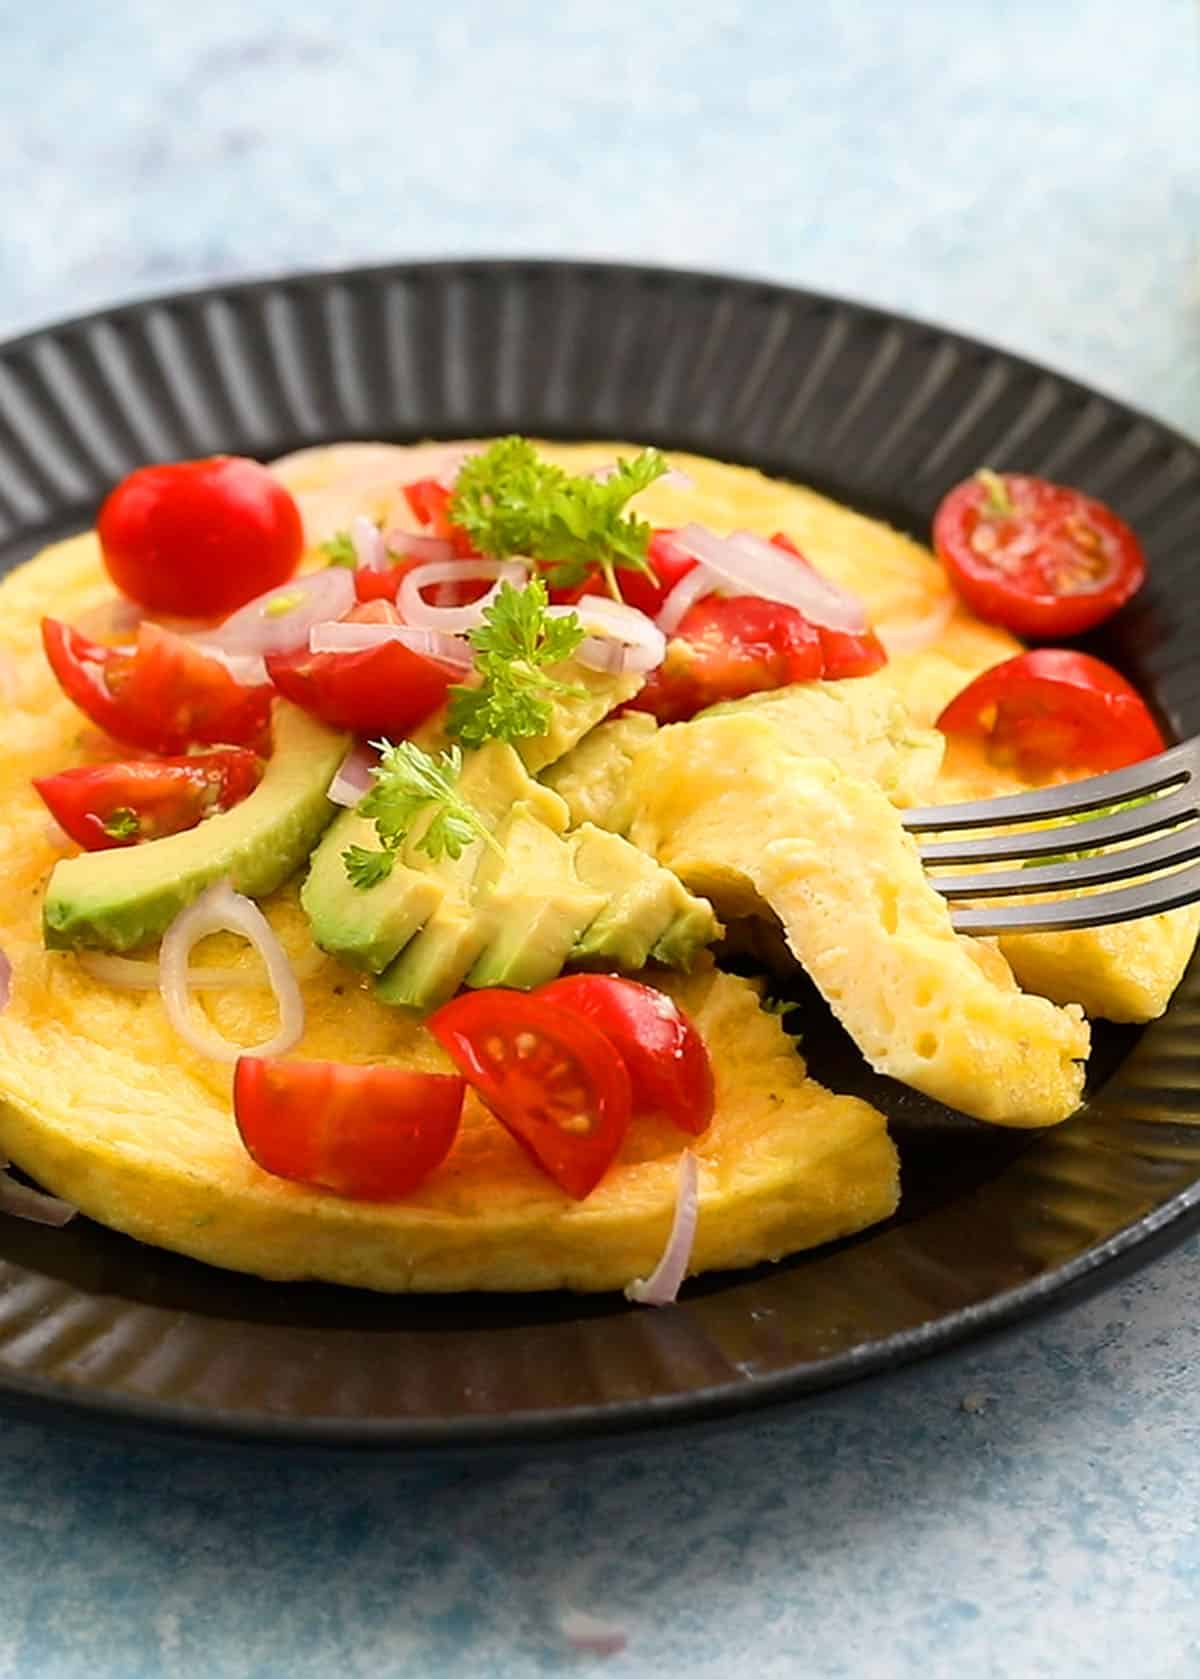 one round omelette topped with tomatoes and avocado in a black plate.